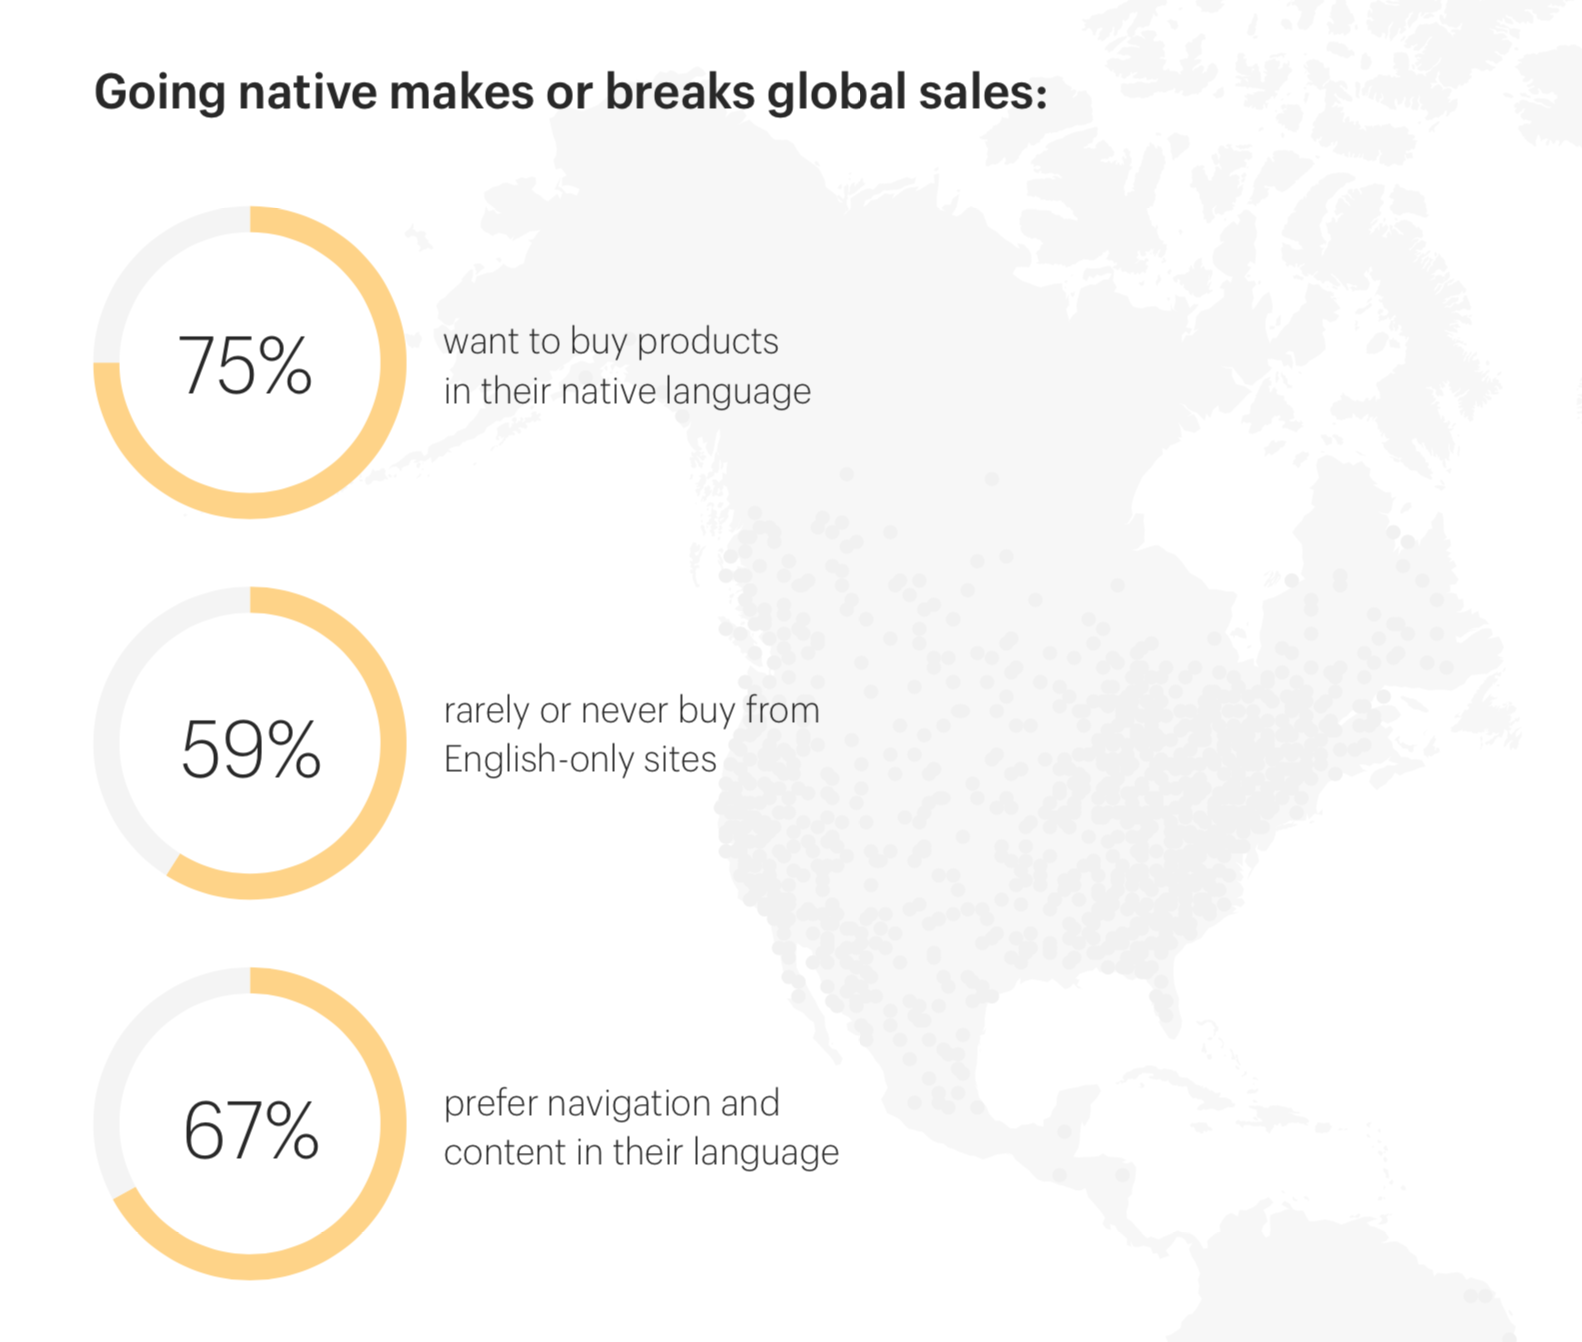 Language is a top challenge in international ecommerce